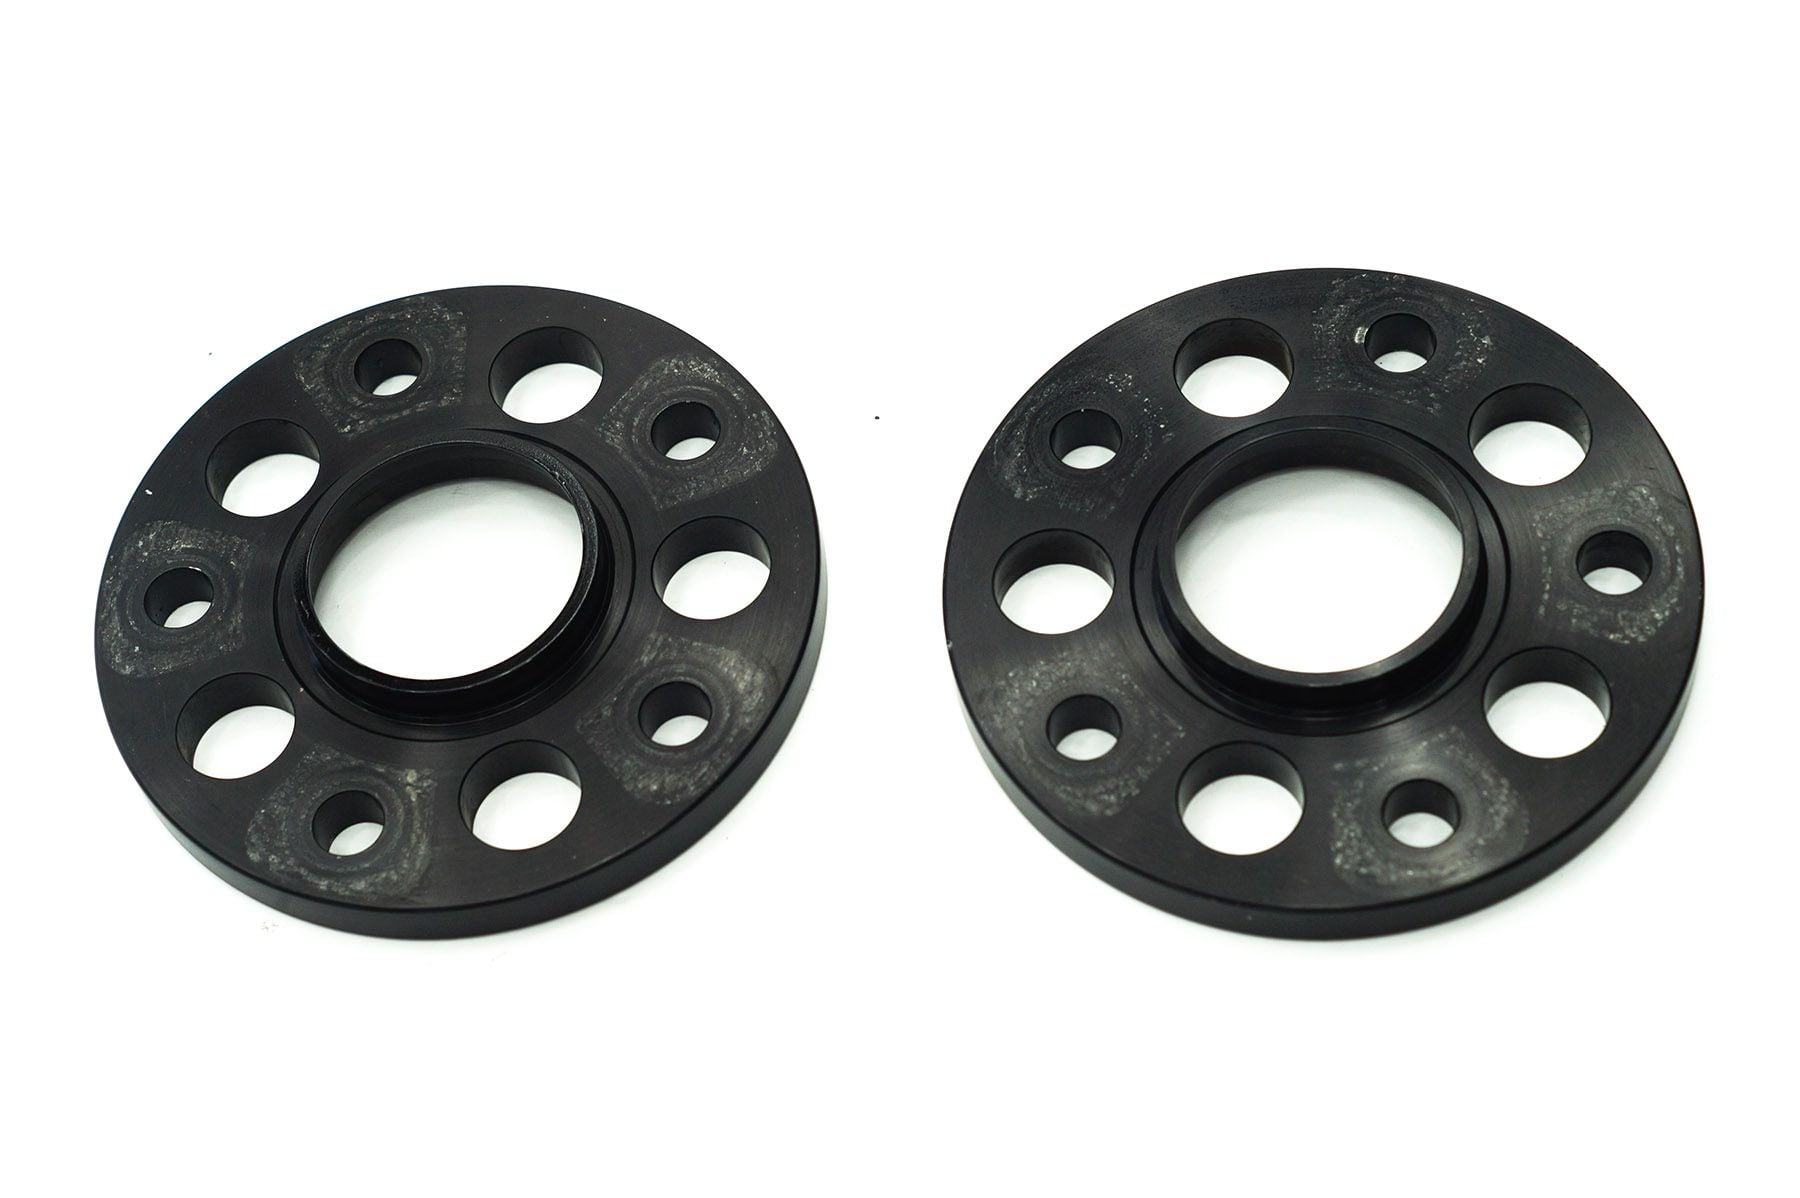 2006 Porsche 911 - 15MM Black Hub Centric Wheel Spacers  - Wheels and Tires/Axles - $80 - Bayport, NY 11705, United States